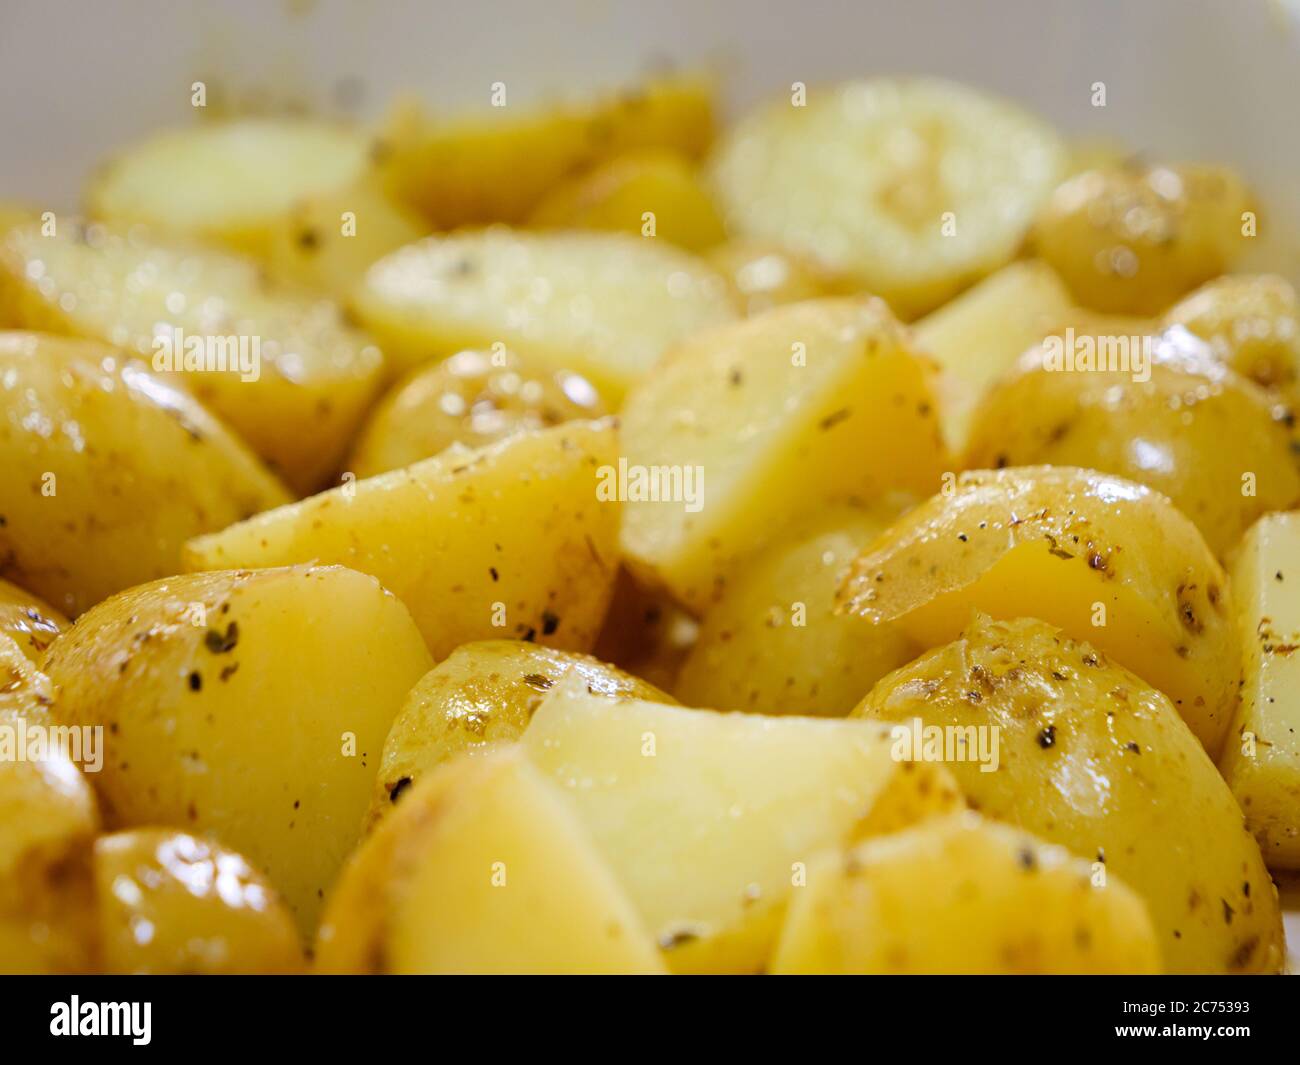 Macro close-up of sliced boiled potatoes seasoned with herbs and olive oil prior to being put in the oven Stock Photo